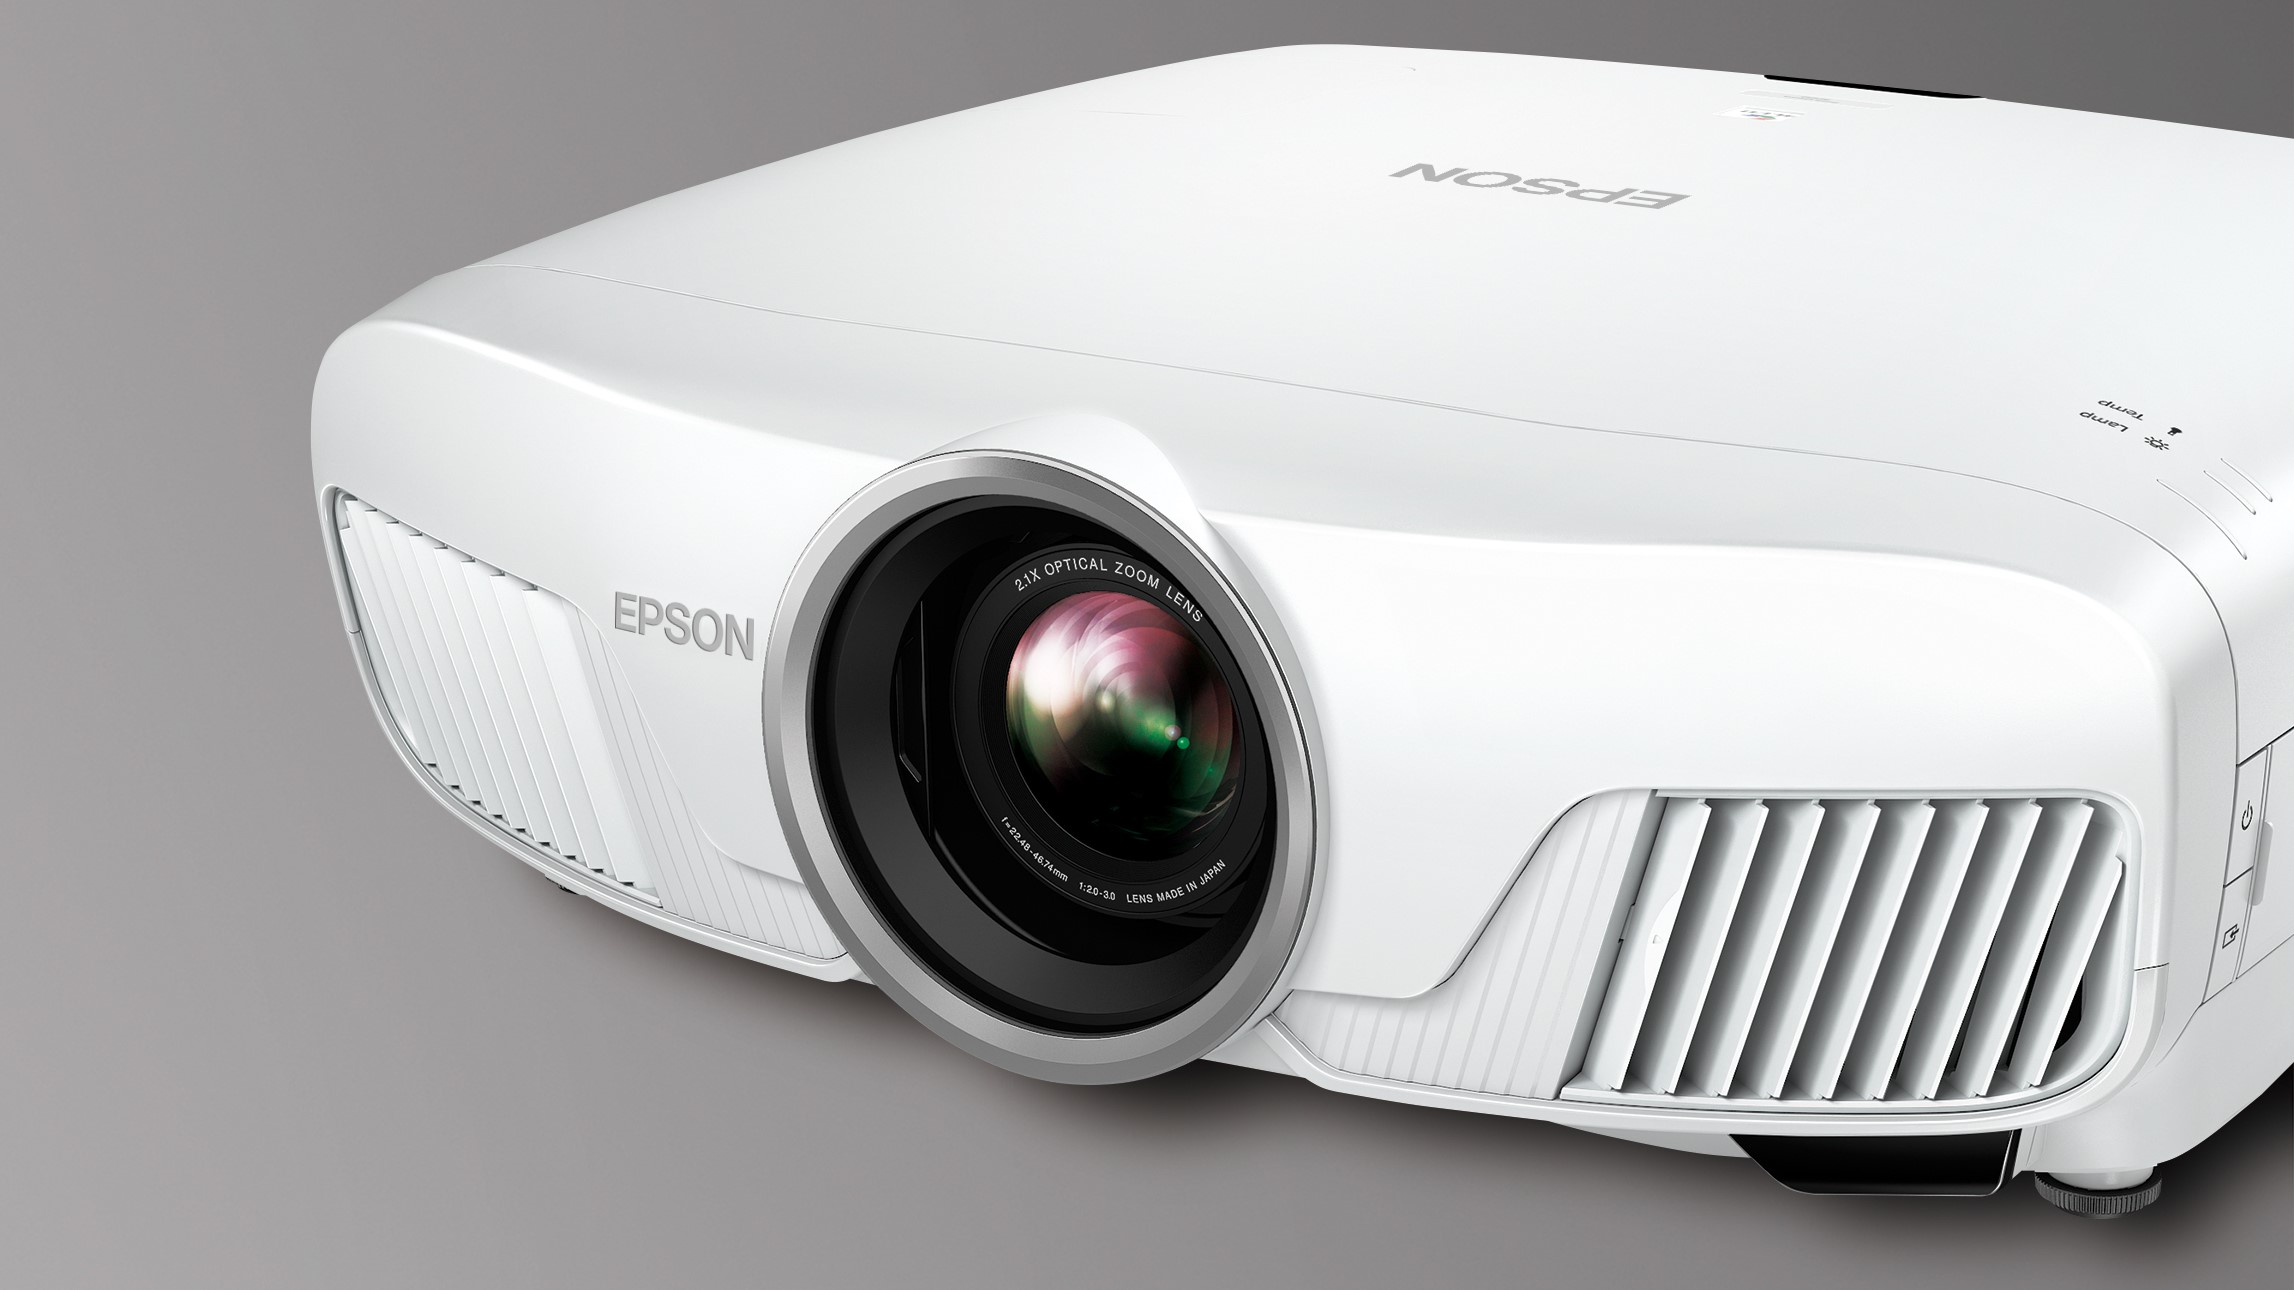 The best projectors 2019: 8 projectors to consider for your home cinema 9